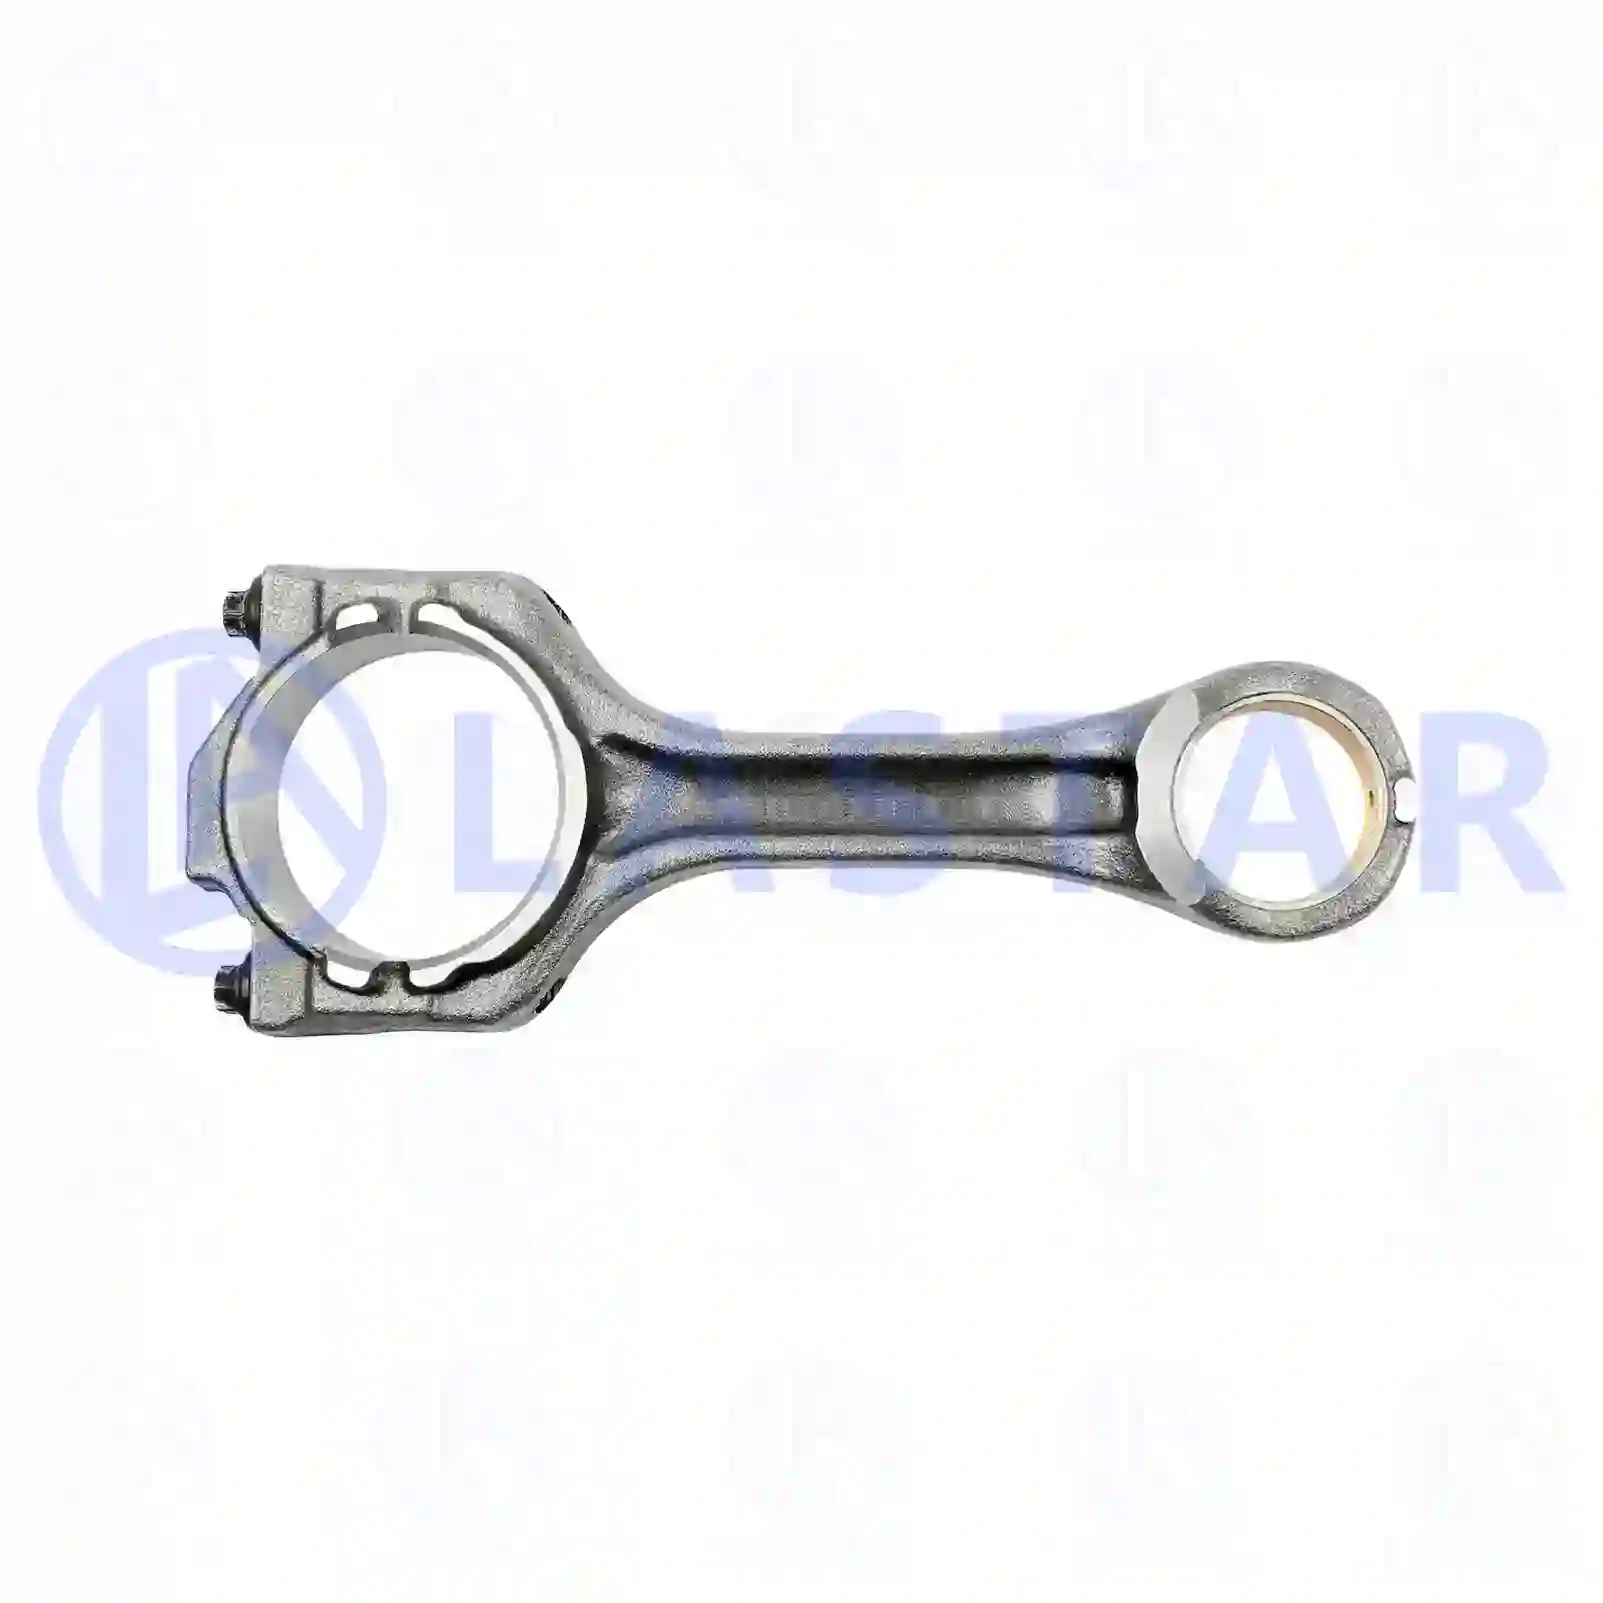 Connecting rod, straight head, 77704436, 51024006045, 51024006068, ||  77704436 Lastar Spare Part | Truck Spare Parts, Auotomotive Spare Parts Connecting rod, straight head, 77704436, 51024006045, 51024006068, ||  77704436 Lastar Spare Part | Truck Spare Parts, Auotomotive Spare Parts